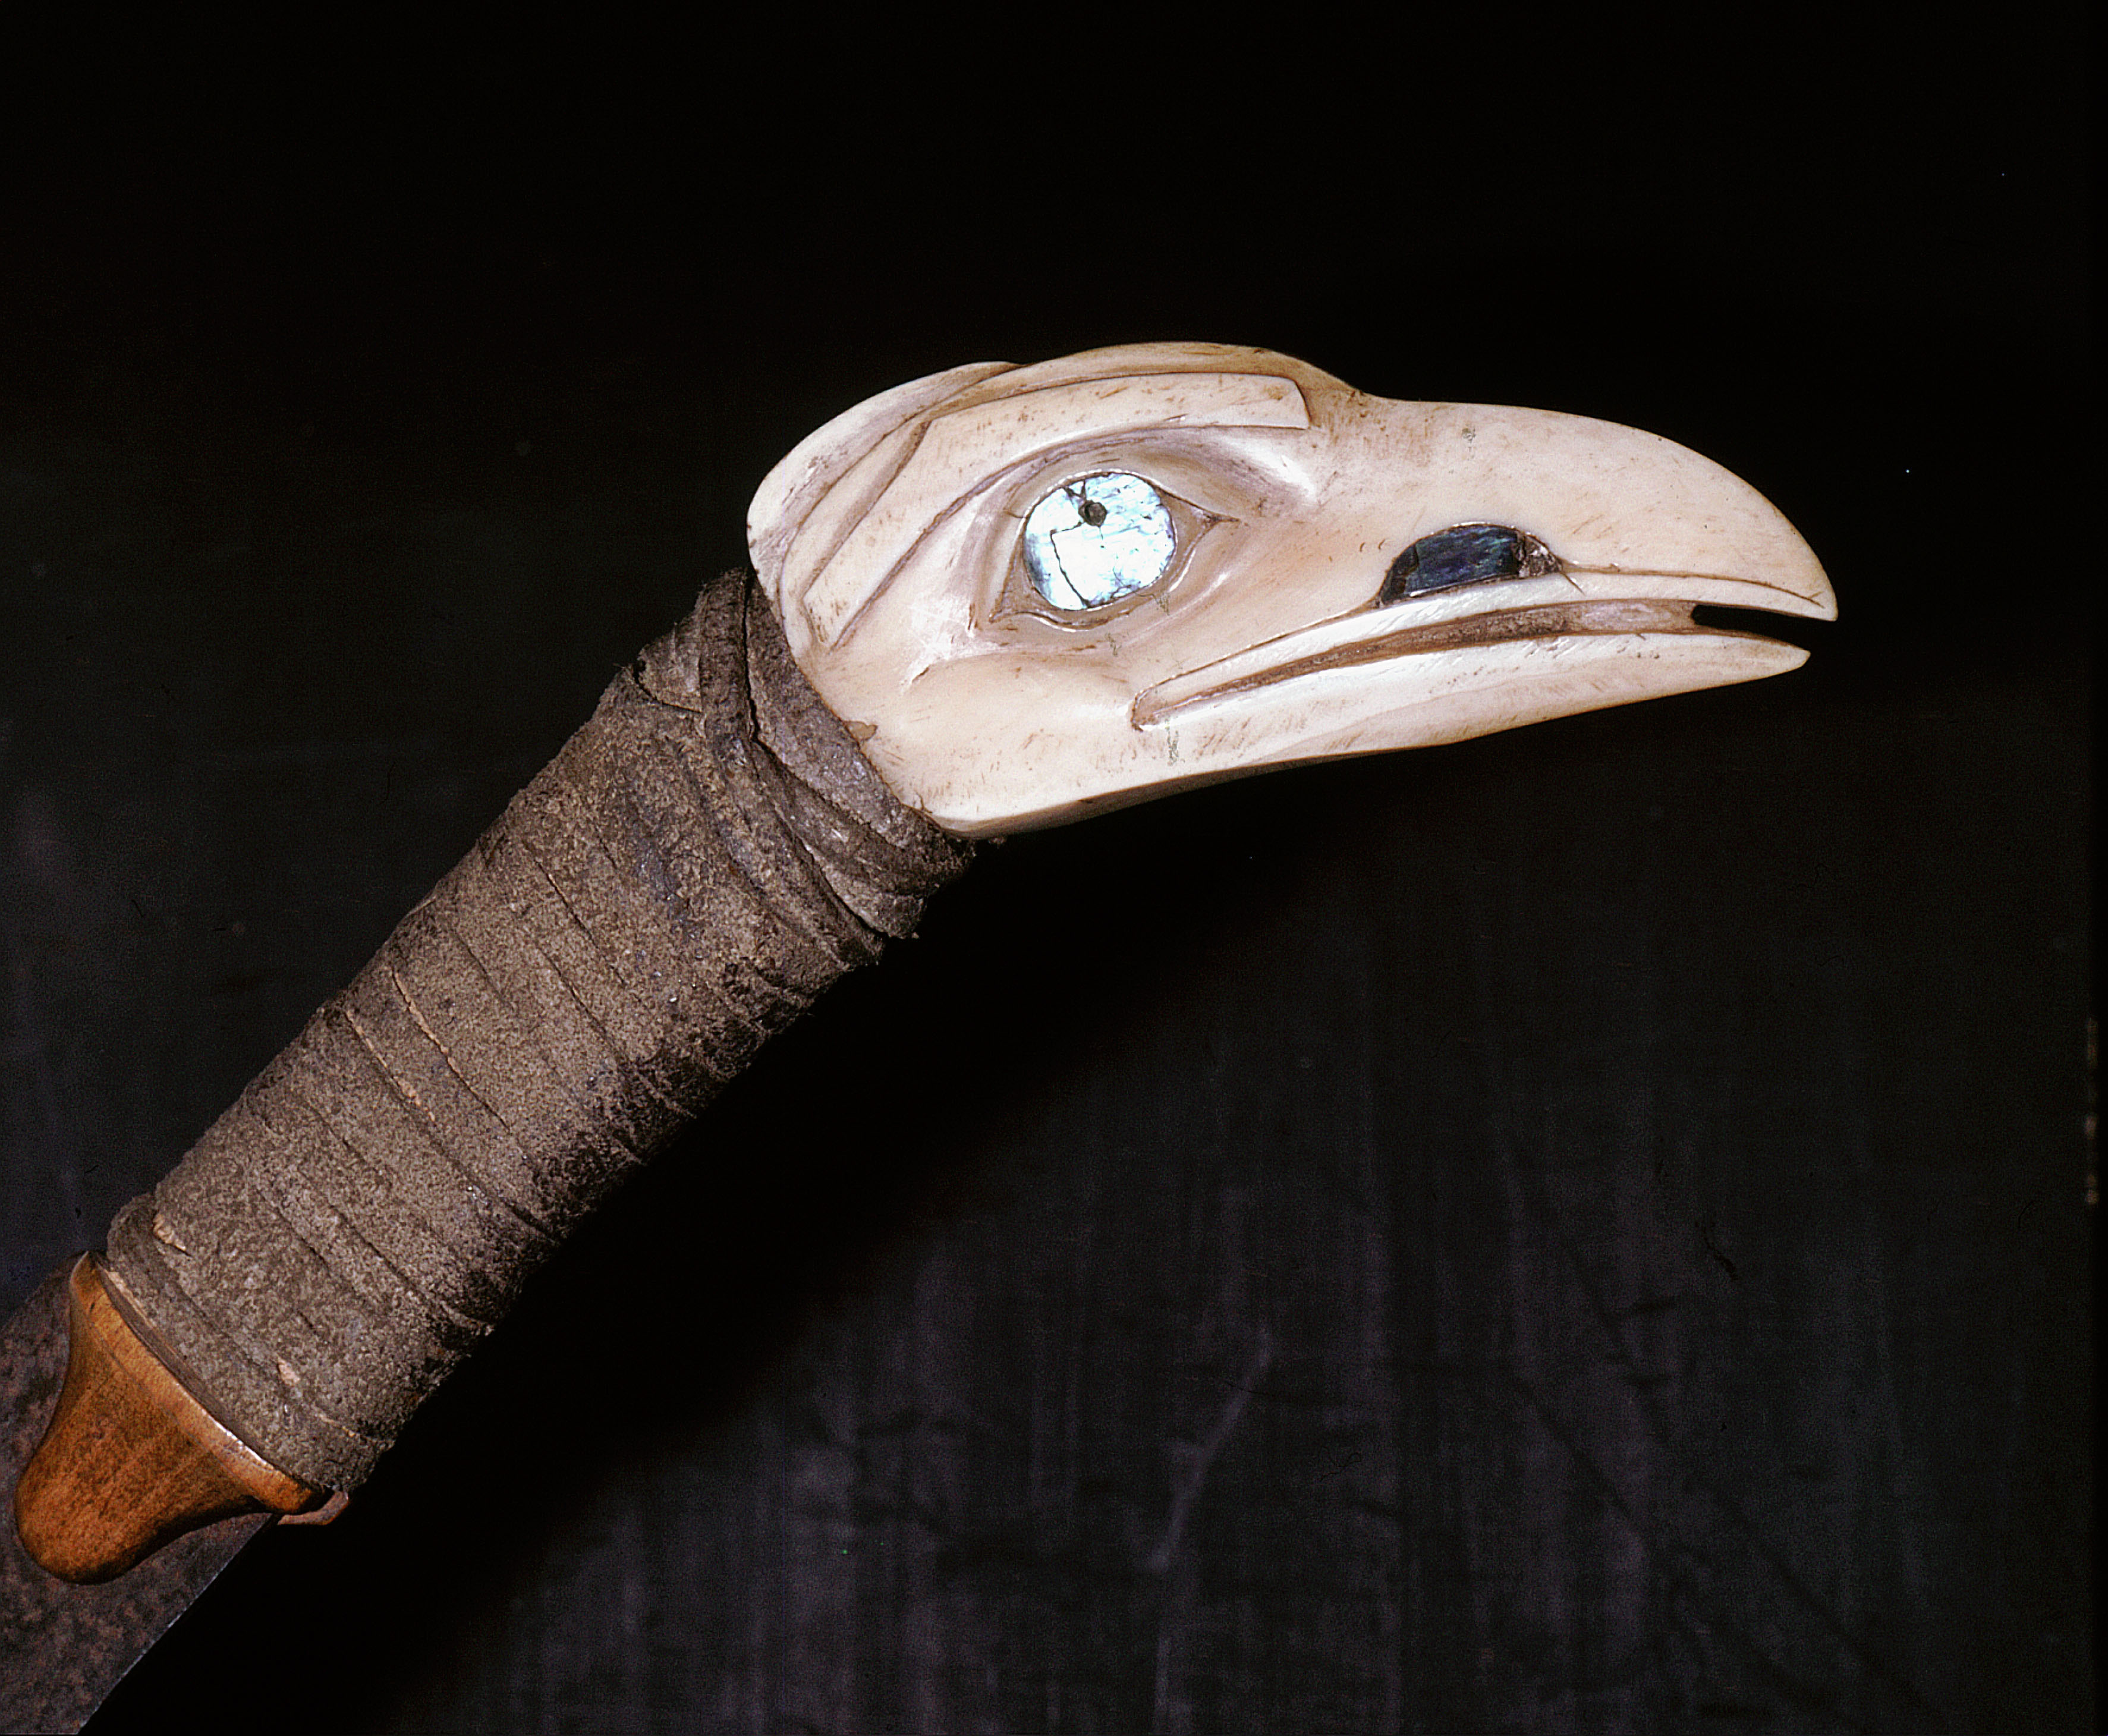 19th Century Haida knife hilt from the Northwest Coast of America depicting a raven. | Source: Getty Images